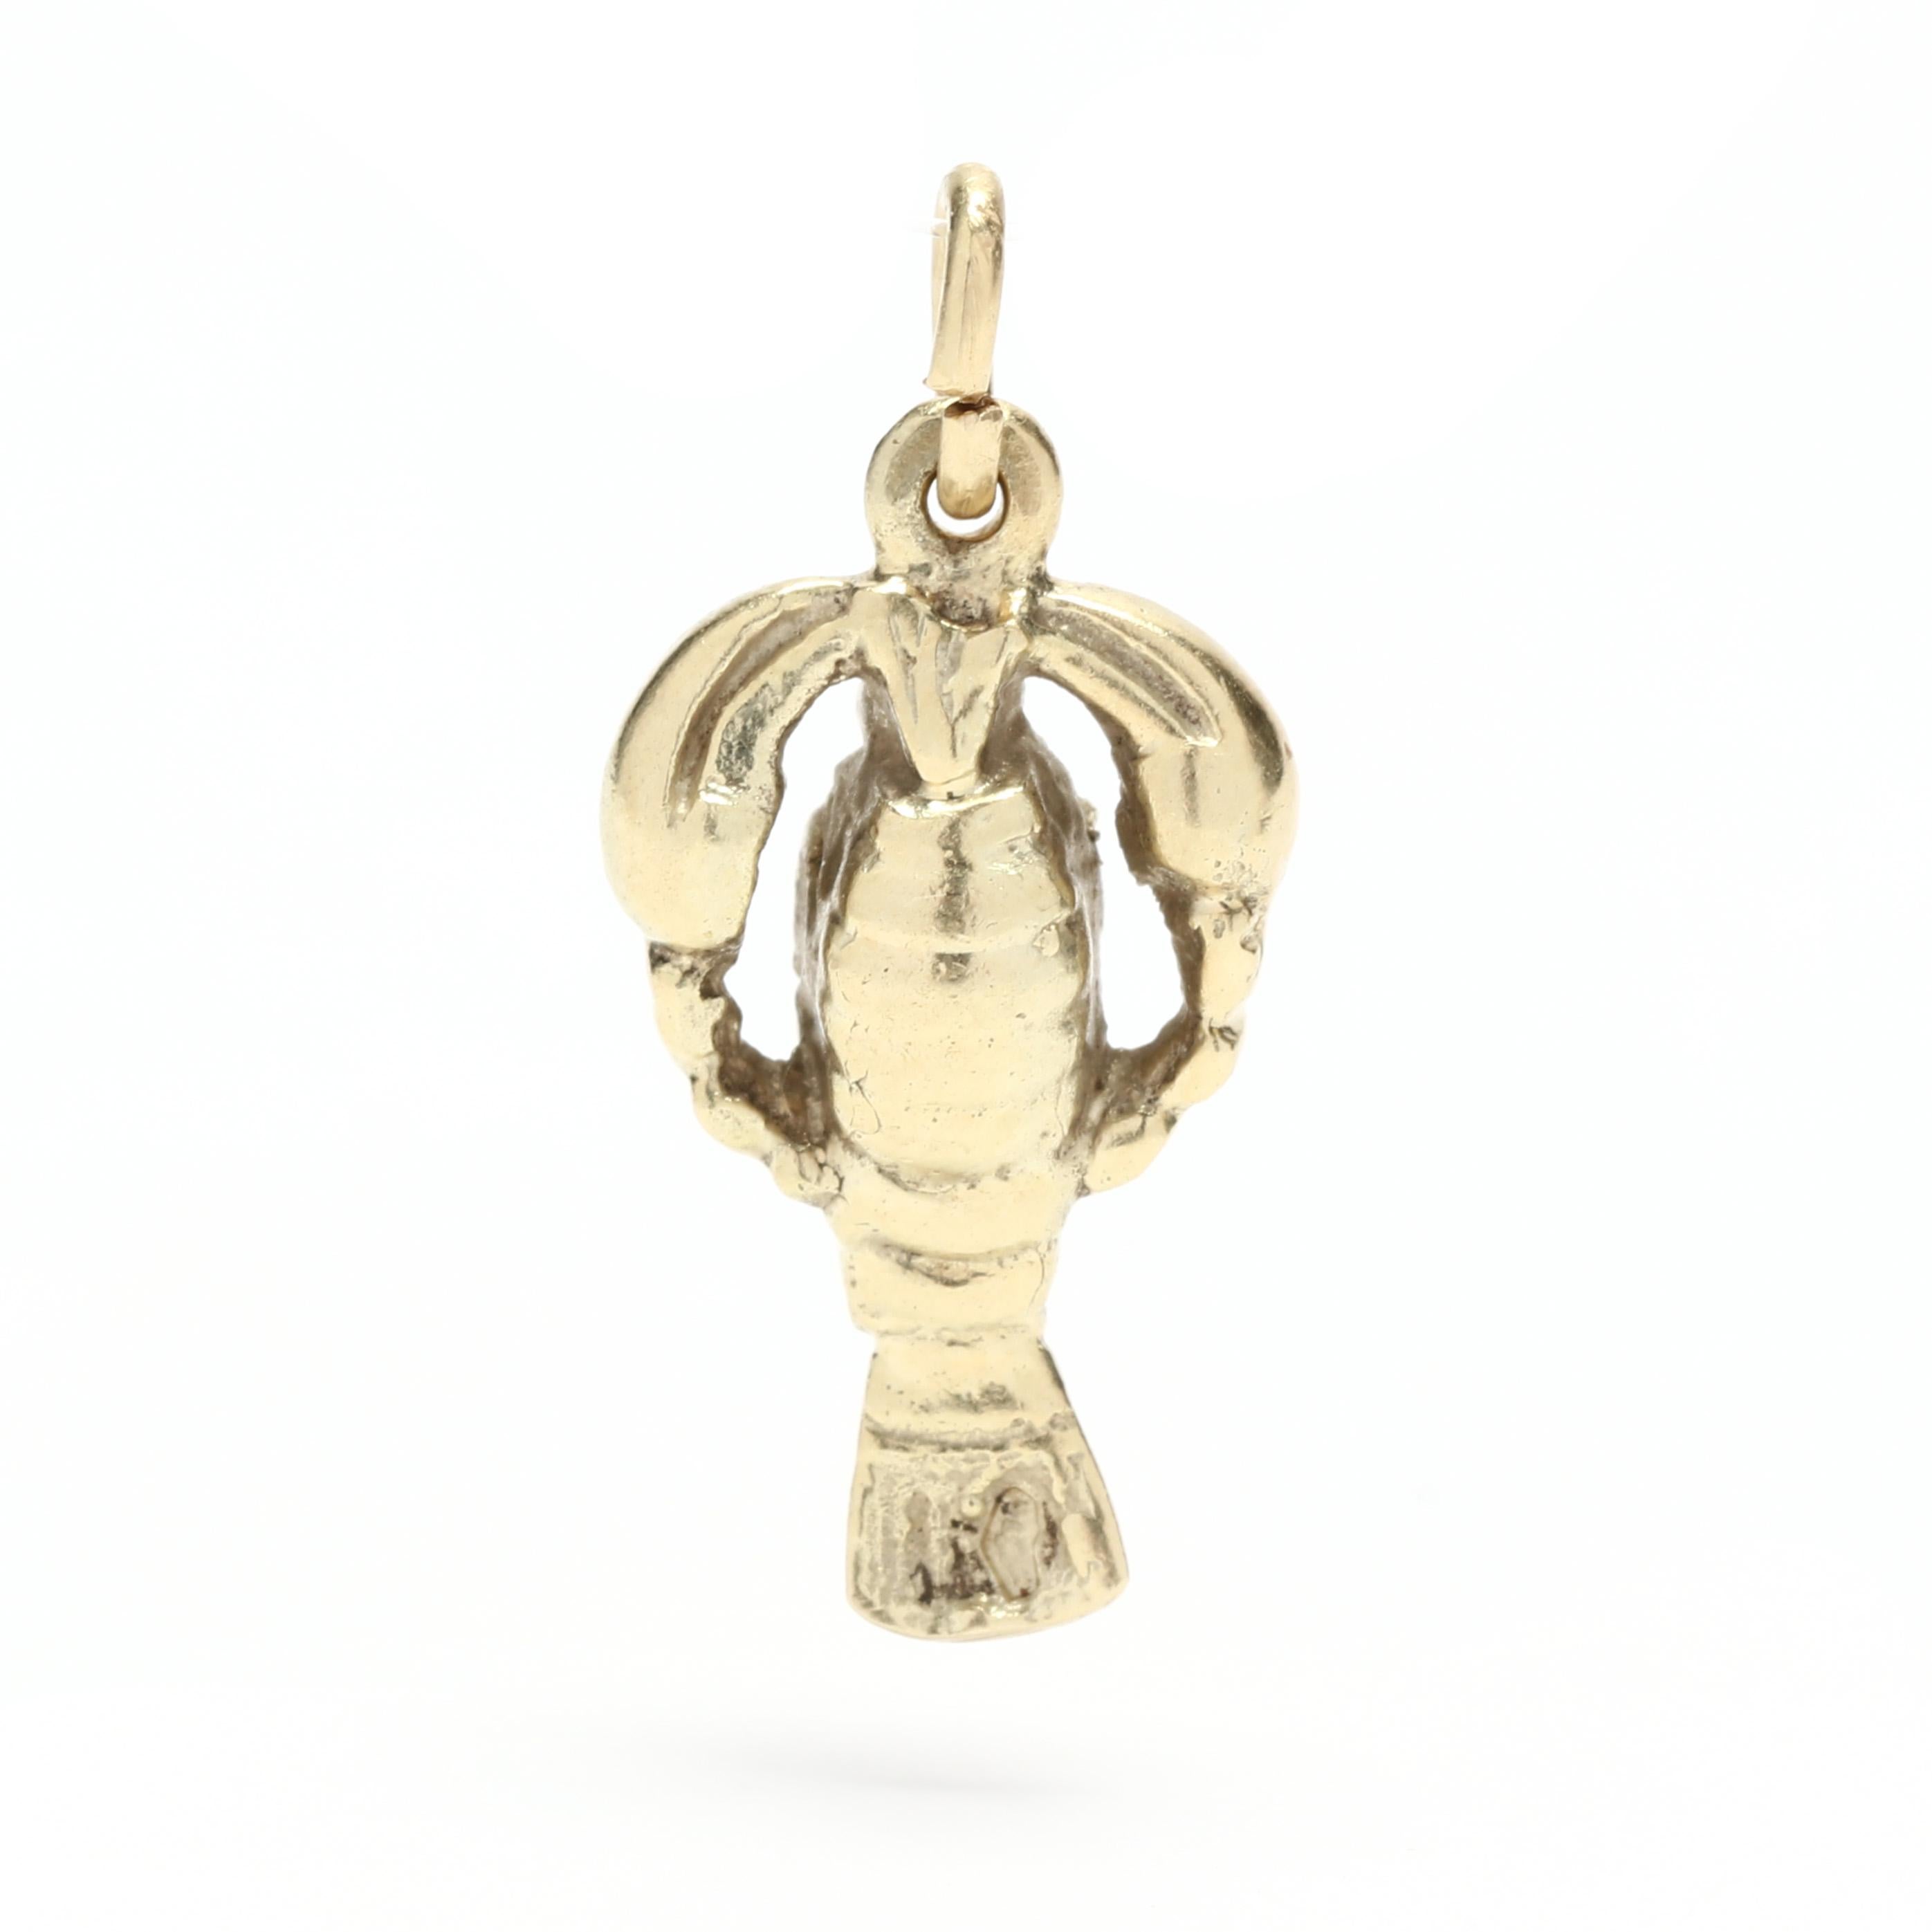 A vintage 14 karat yellow gold small lobster charm. This sea life charm features a lobster motif with engraved detailing and suspended from a thin bail.

Length: 3/4 in.

Width: 3/8 in.

Weight: 1.4 dwts. / 2.18 grams

Stamps: 585

Ring Sizings &